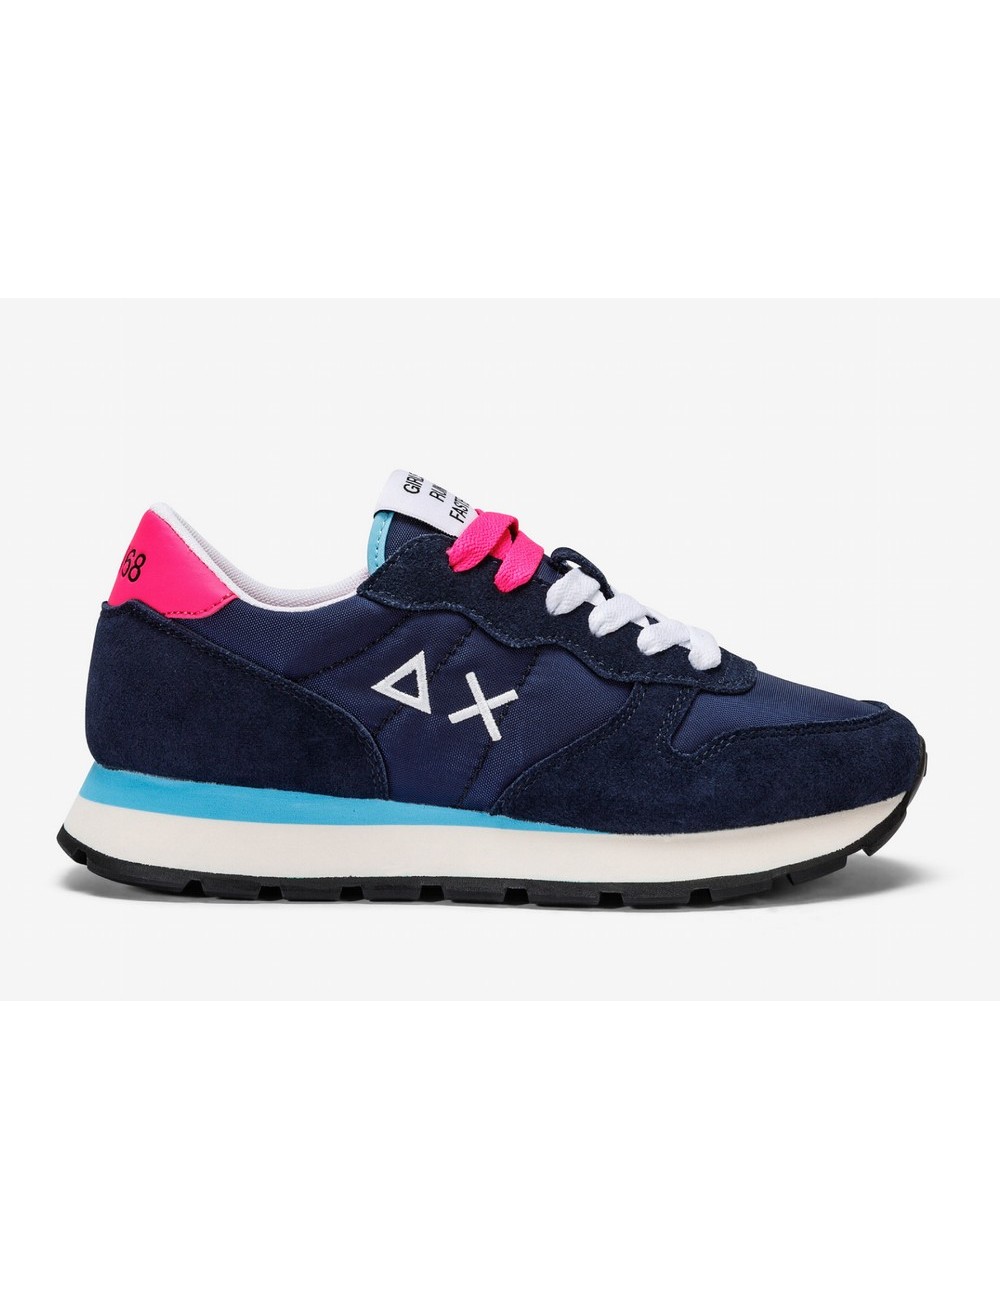 SNEAKERS ALLY SOLID NYLON NAVY BLUE